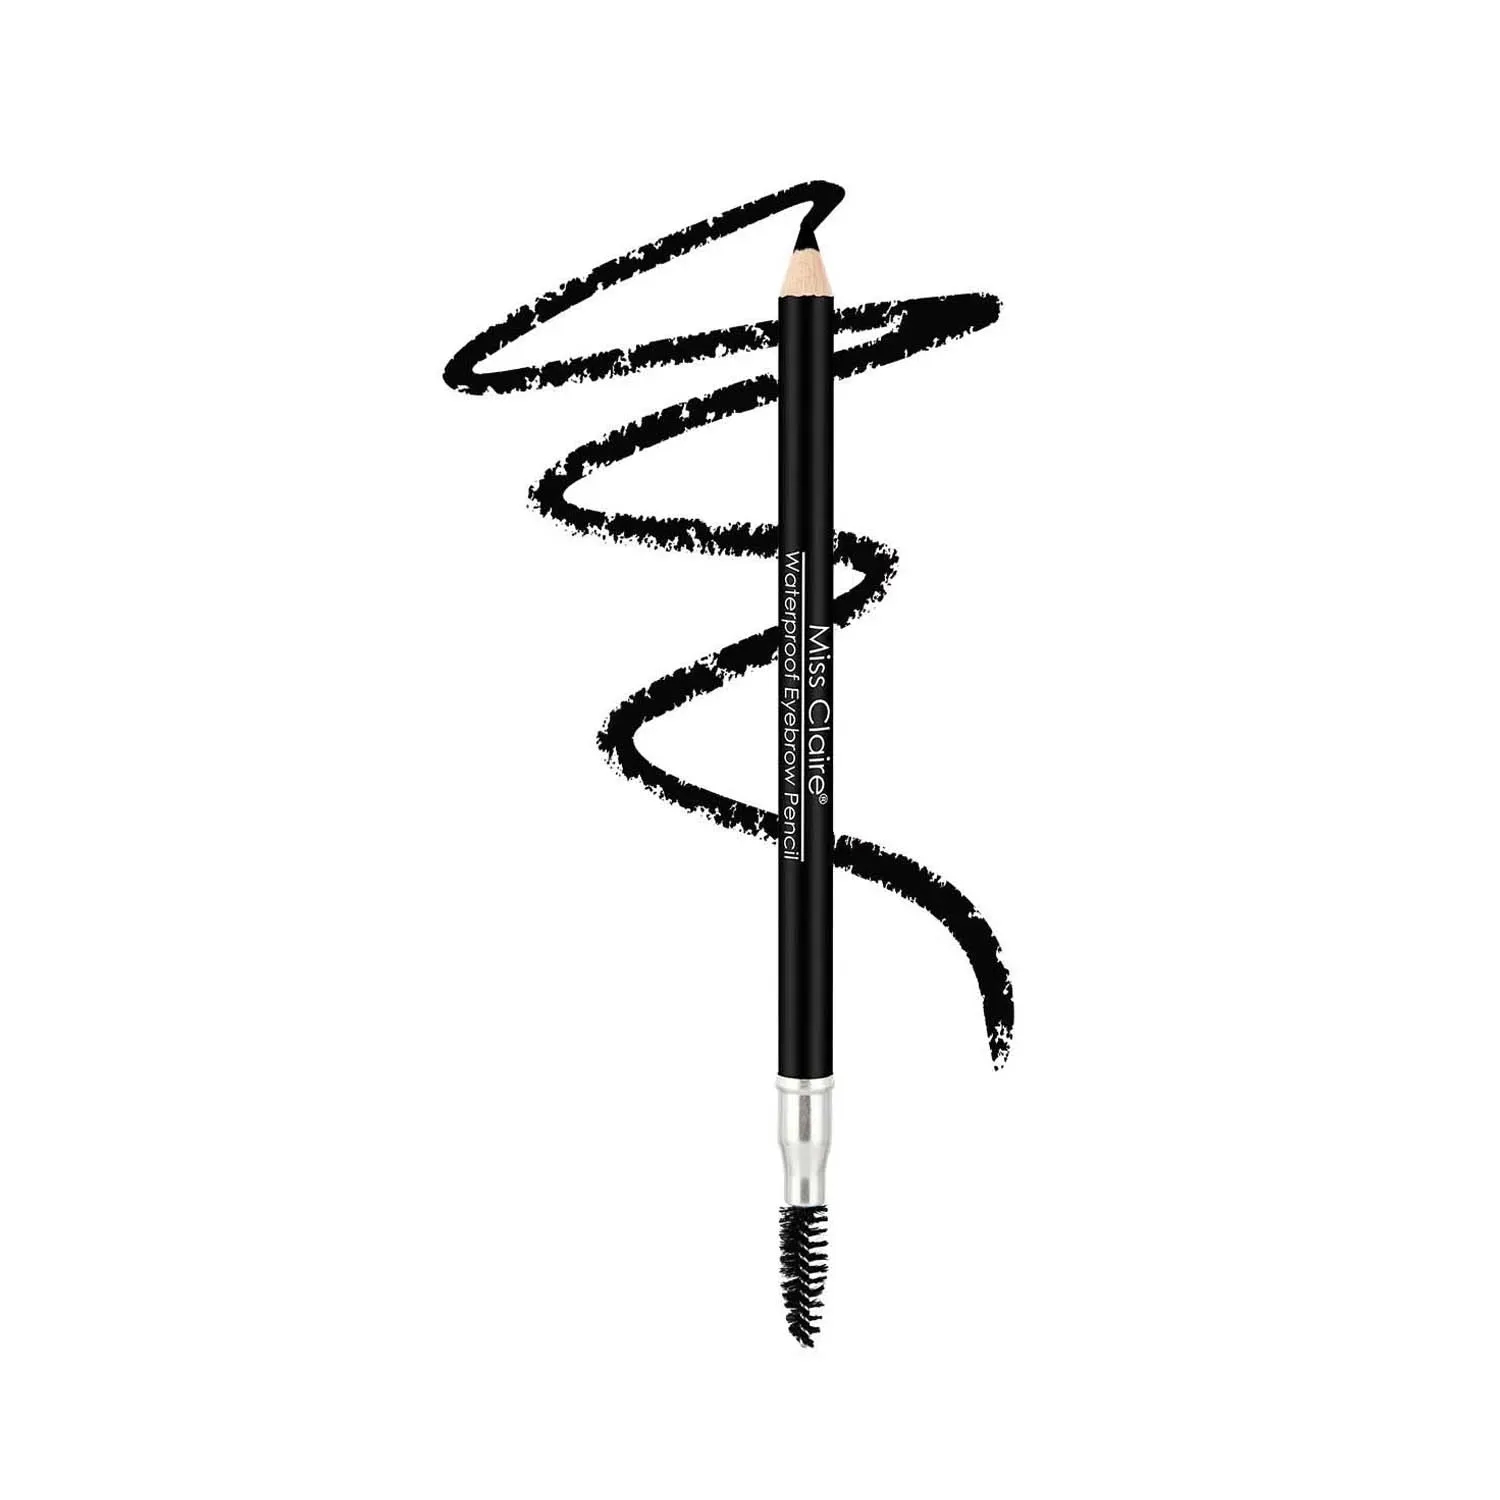 Miss Claire Waterproof Eyebrow Pencil With Mascara Brush - 01 Black (1.4g)